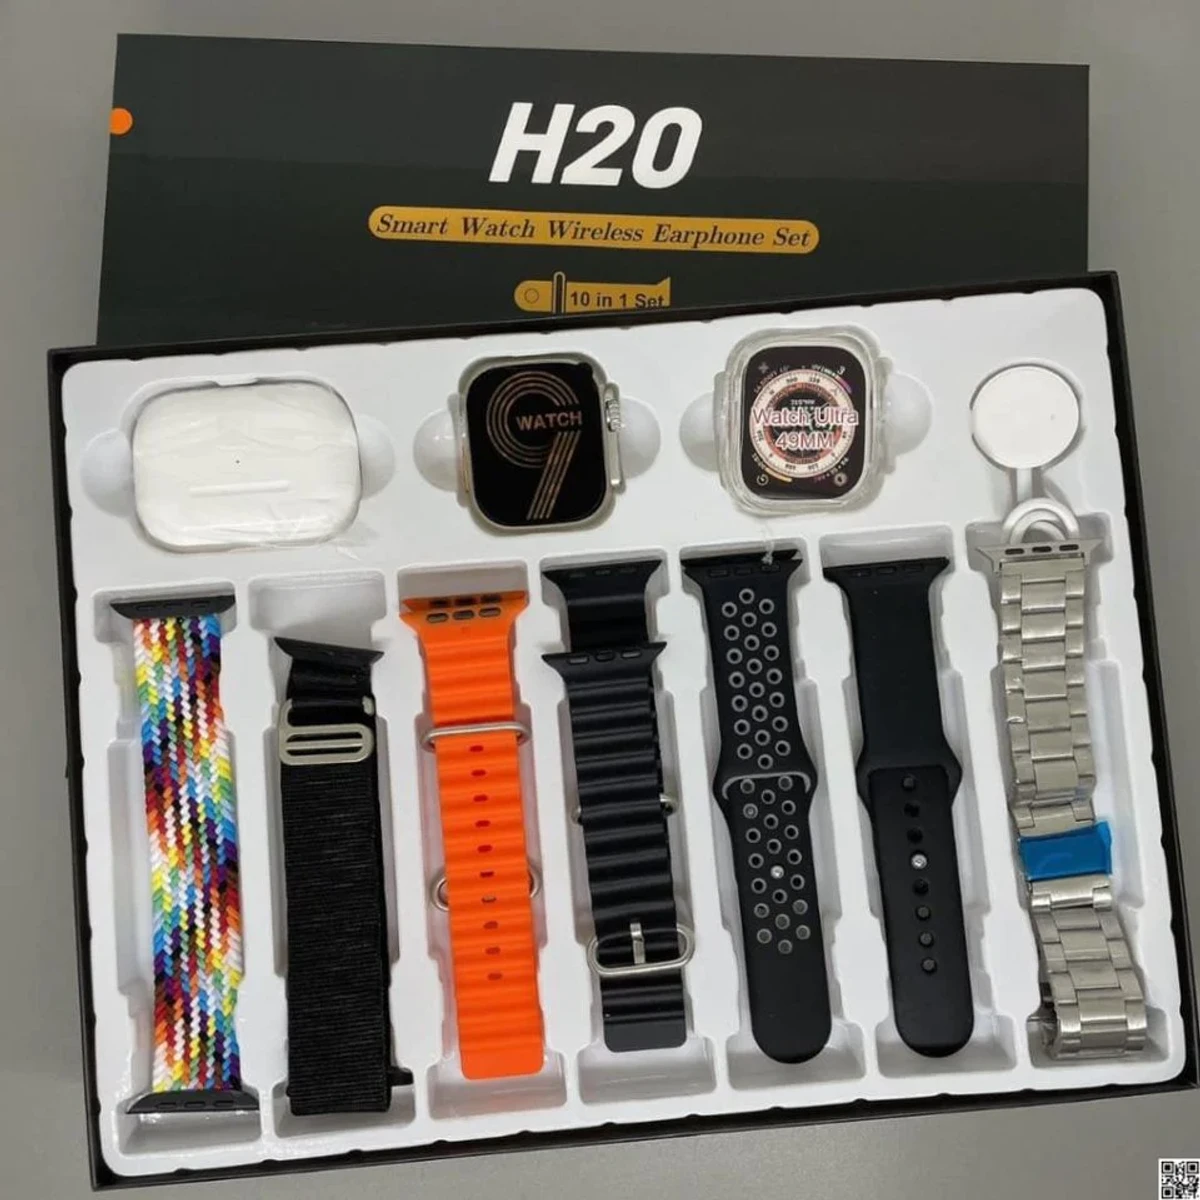 H20 smartwatch with wireless Airpods